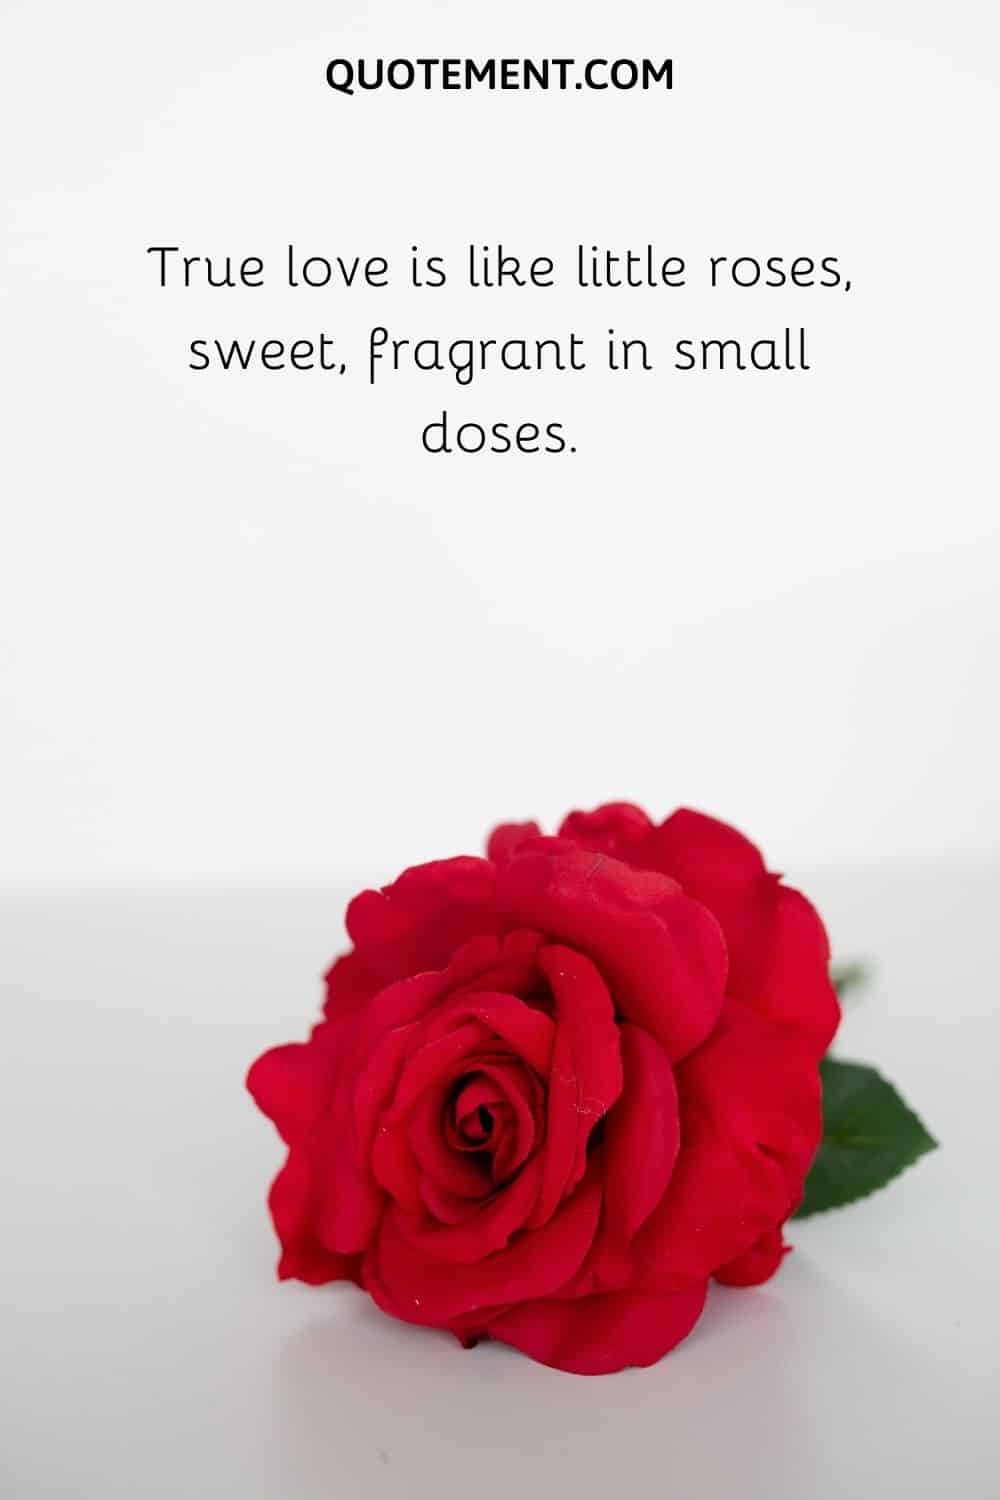 True love is like little roses, sweet, fragrant in small doses.